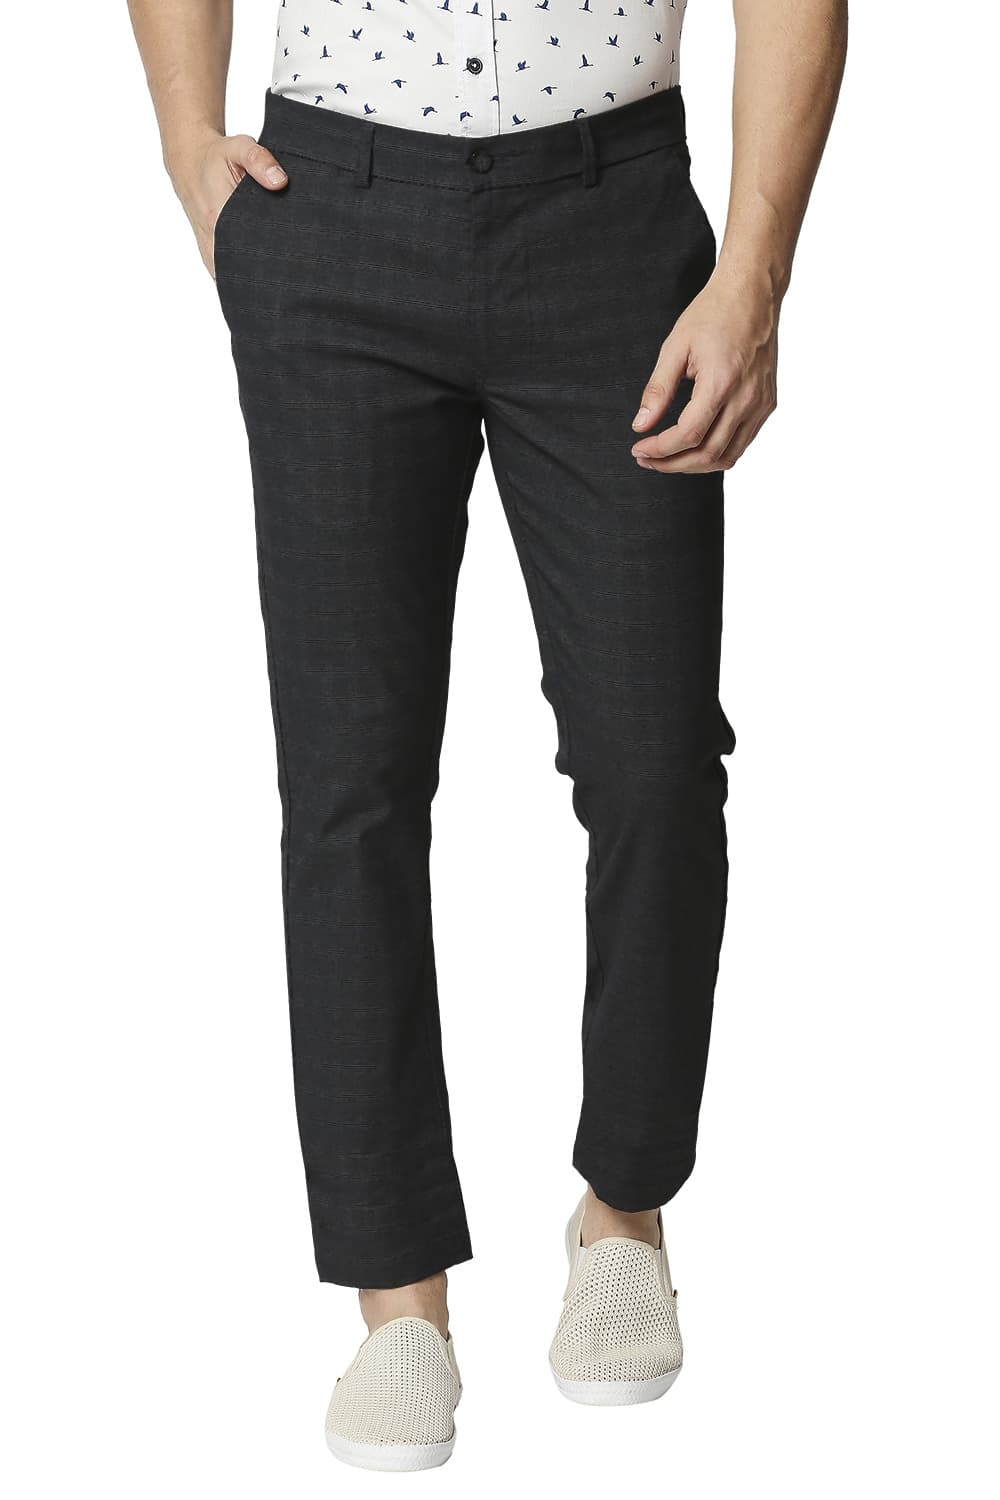 Basics | BASICS CASUAL CHECKED DARK GREY COTTON POLYESTER STRETCH TAPERED TROUSERS 